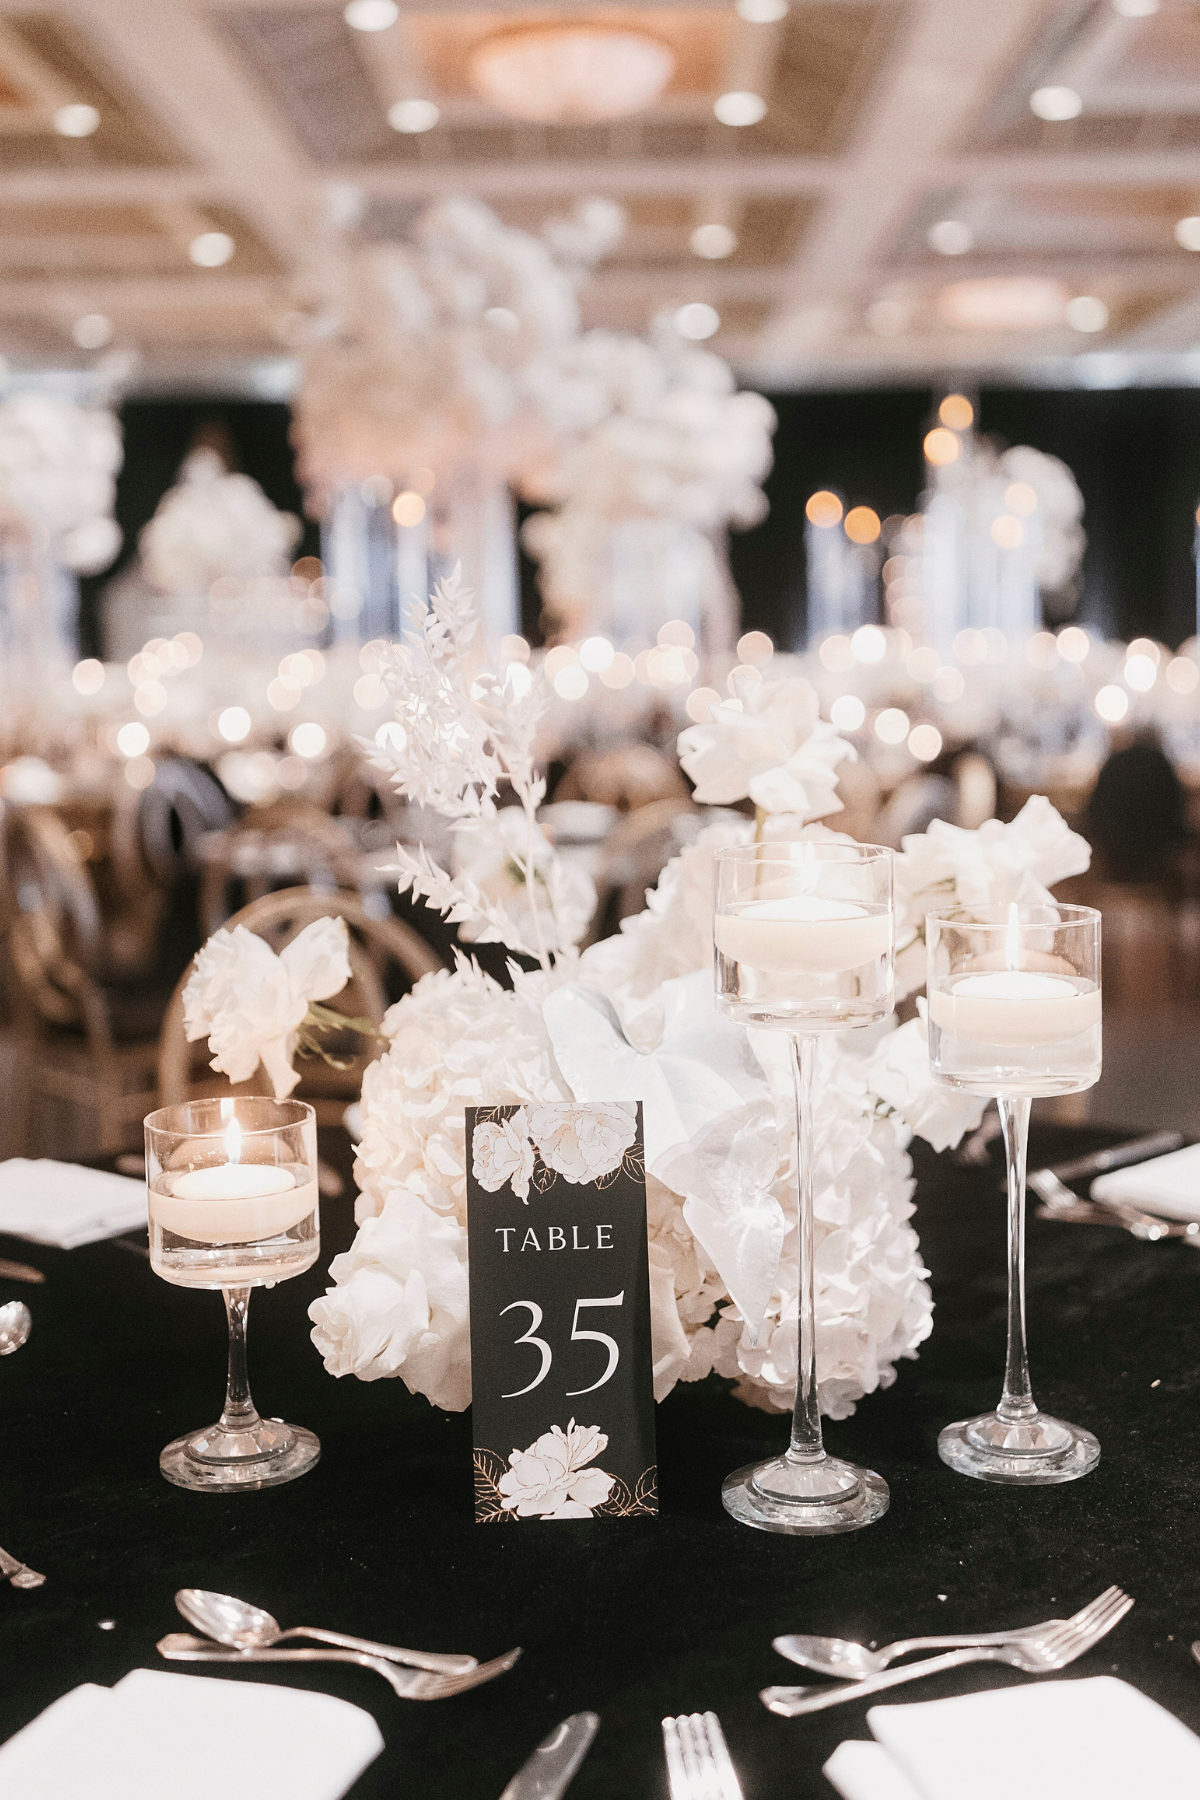 kavita-mohan-black-white-reception-candles-flowers-hydrangea-stationery-table-number